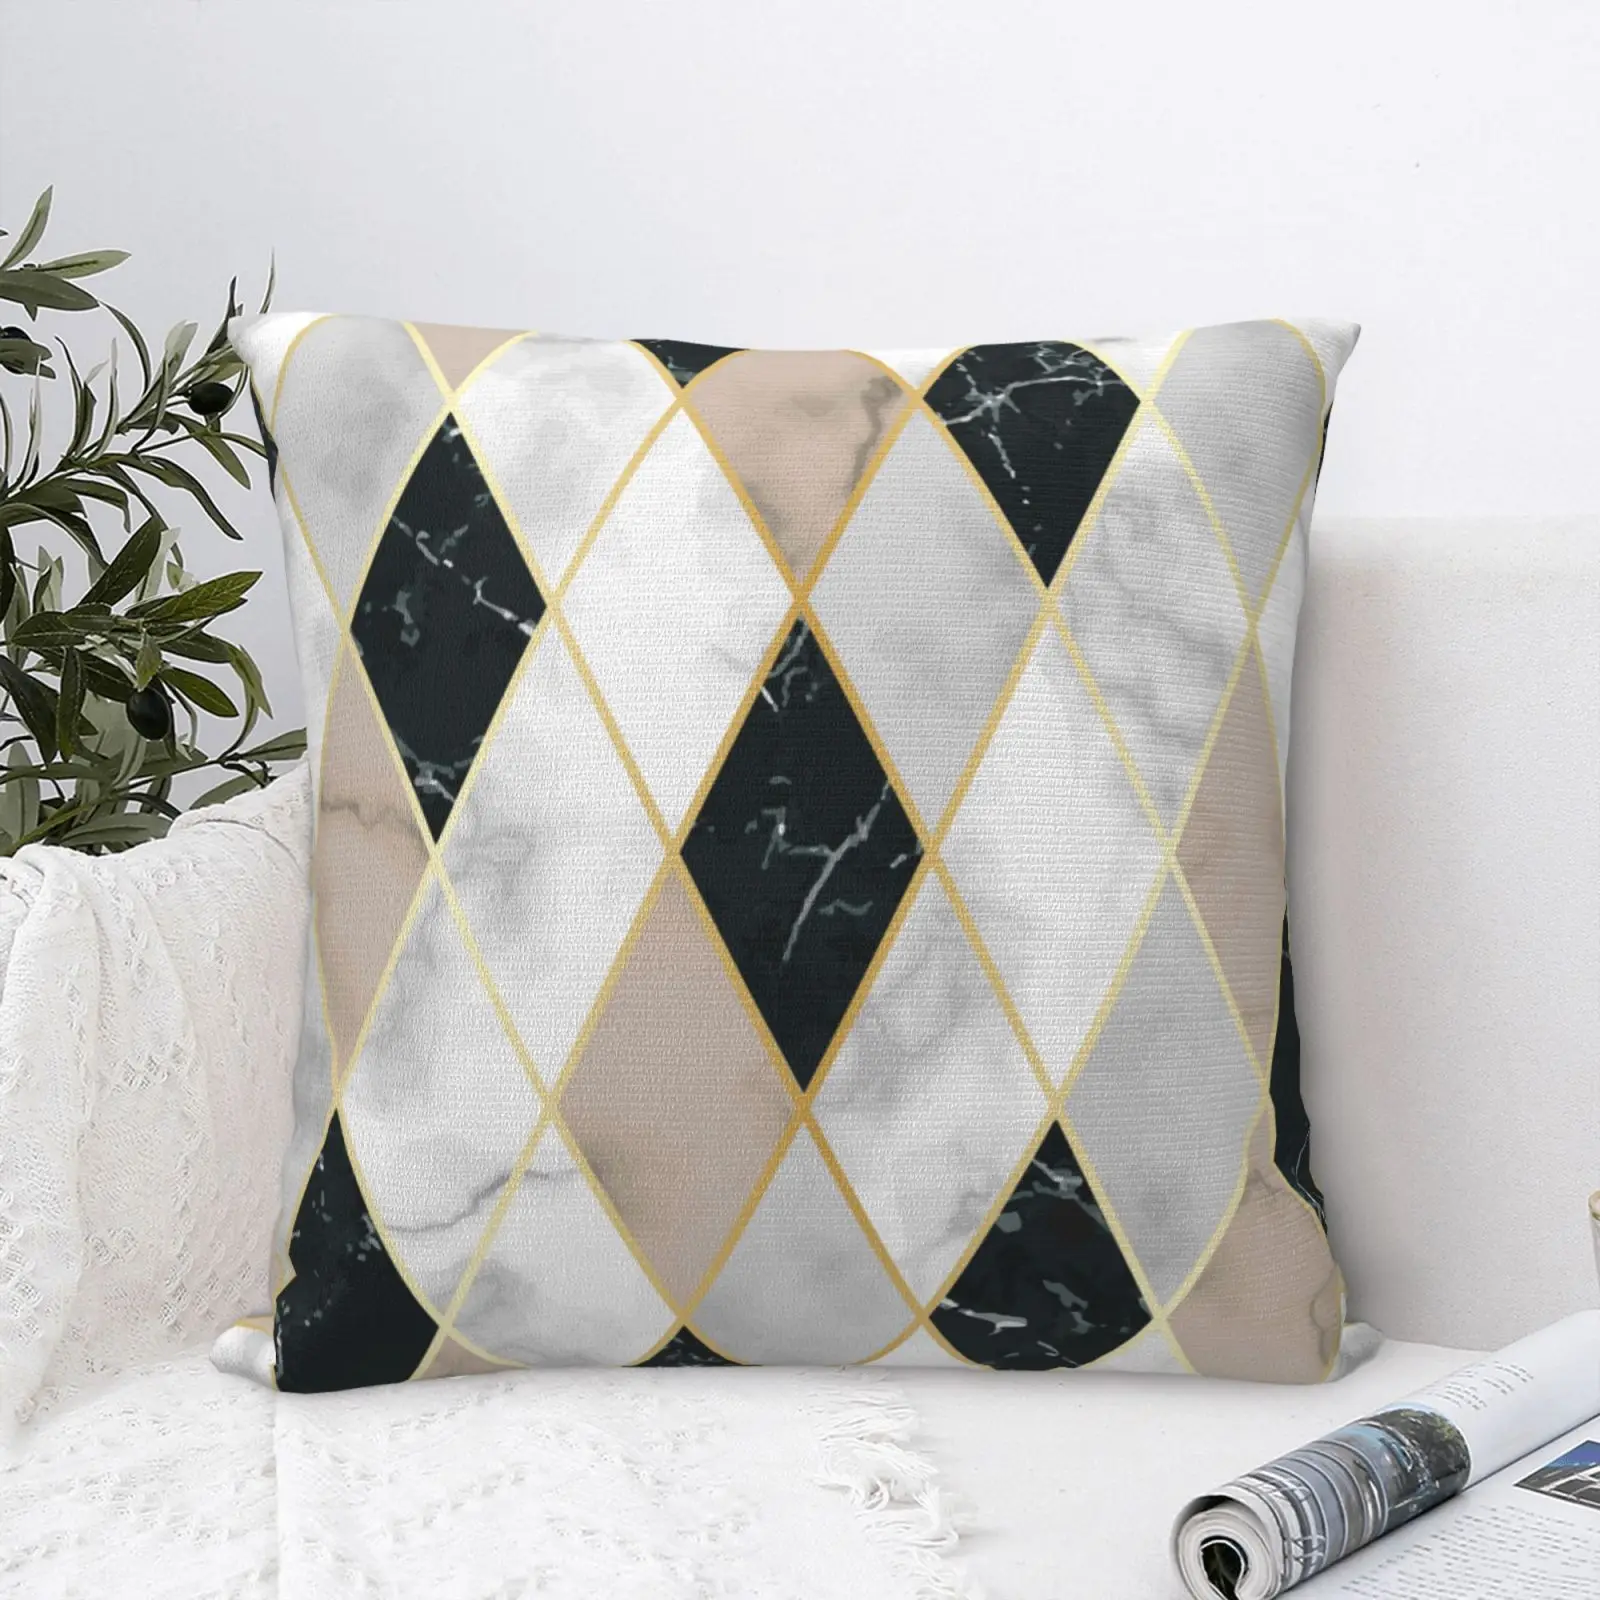 

Brief Marble Geometric 1 Pillow Case Of Sofa Cushions Sofa Decorative Pillows For Sofa Pillow Covers Decorative Anime Big Size